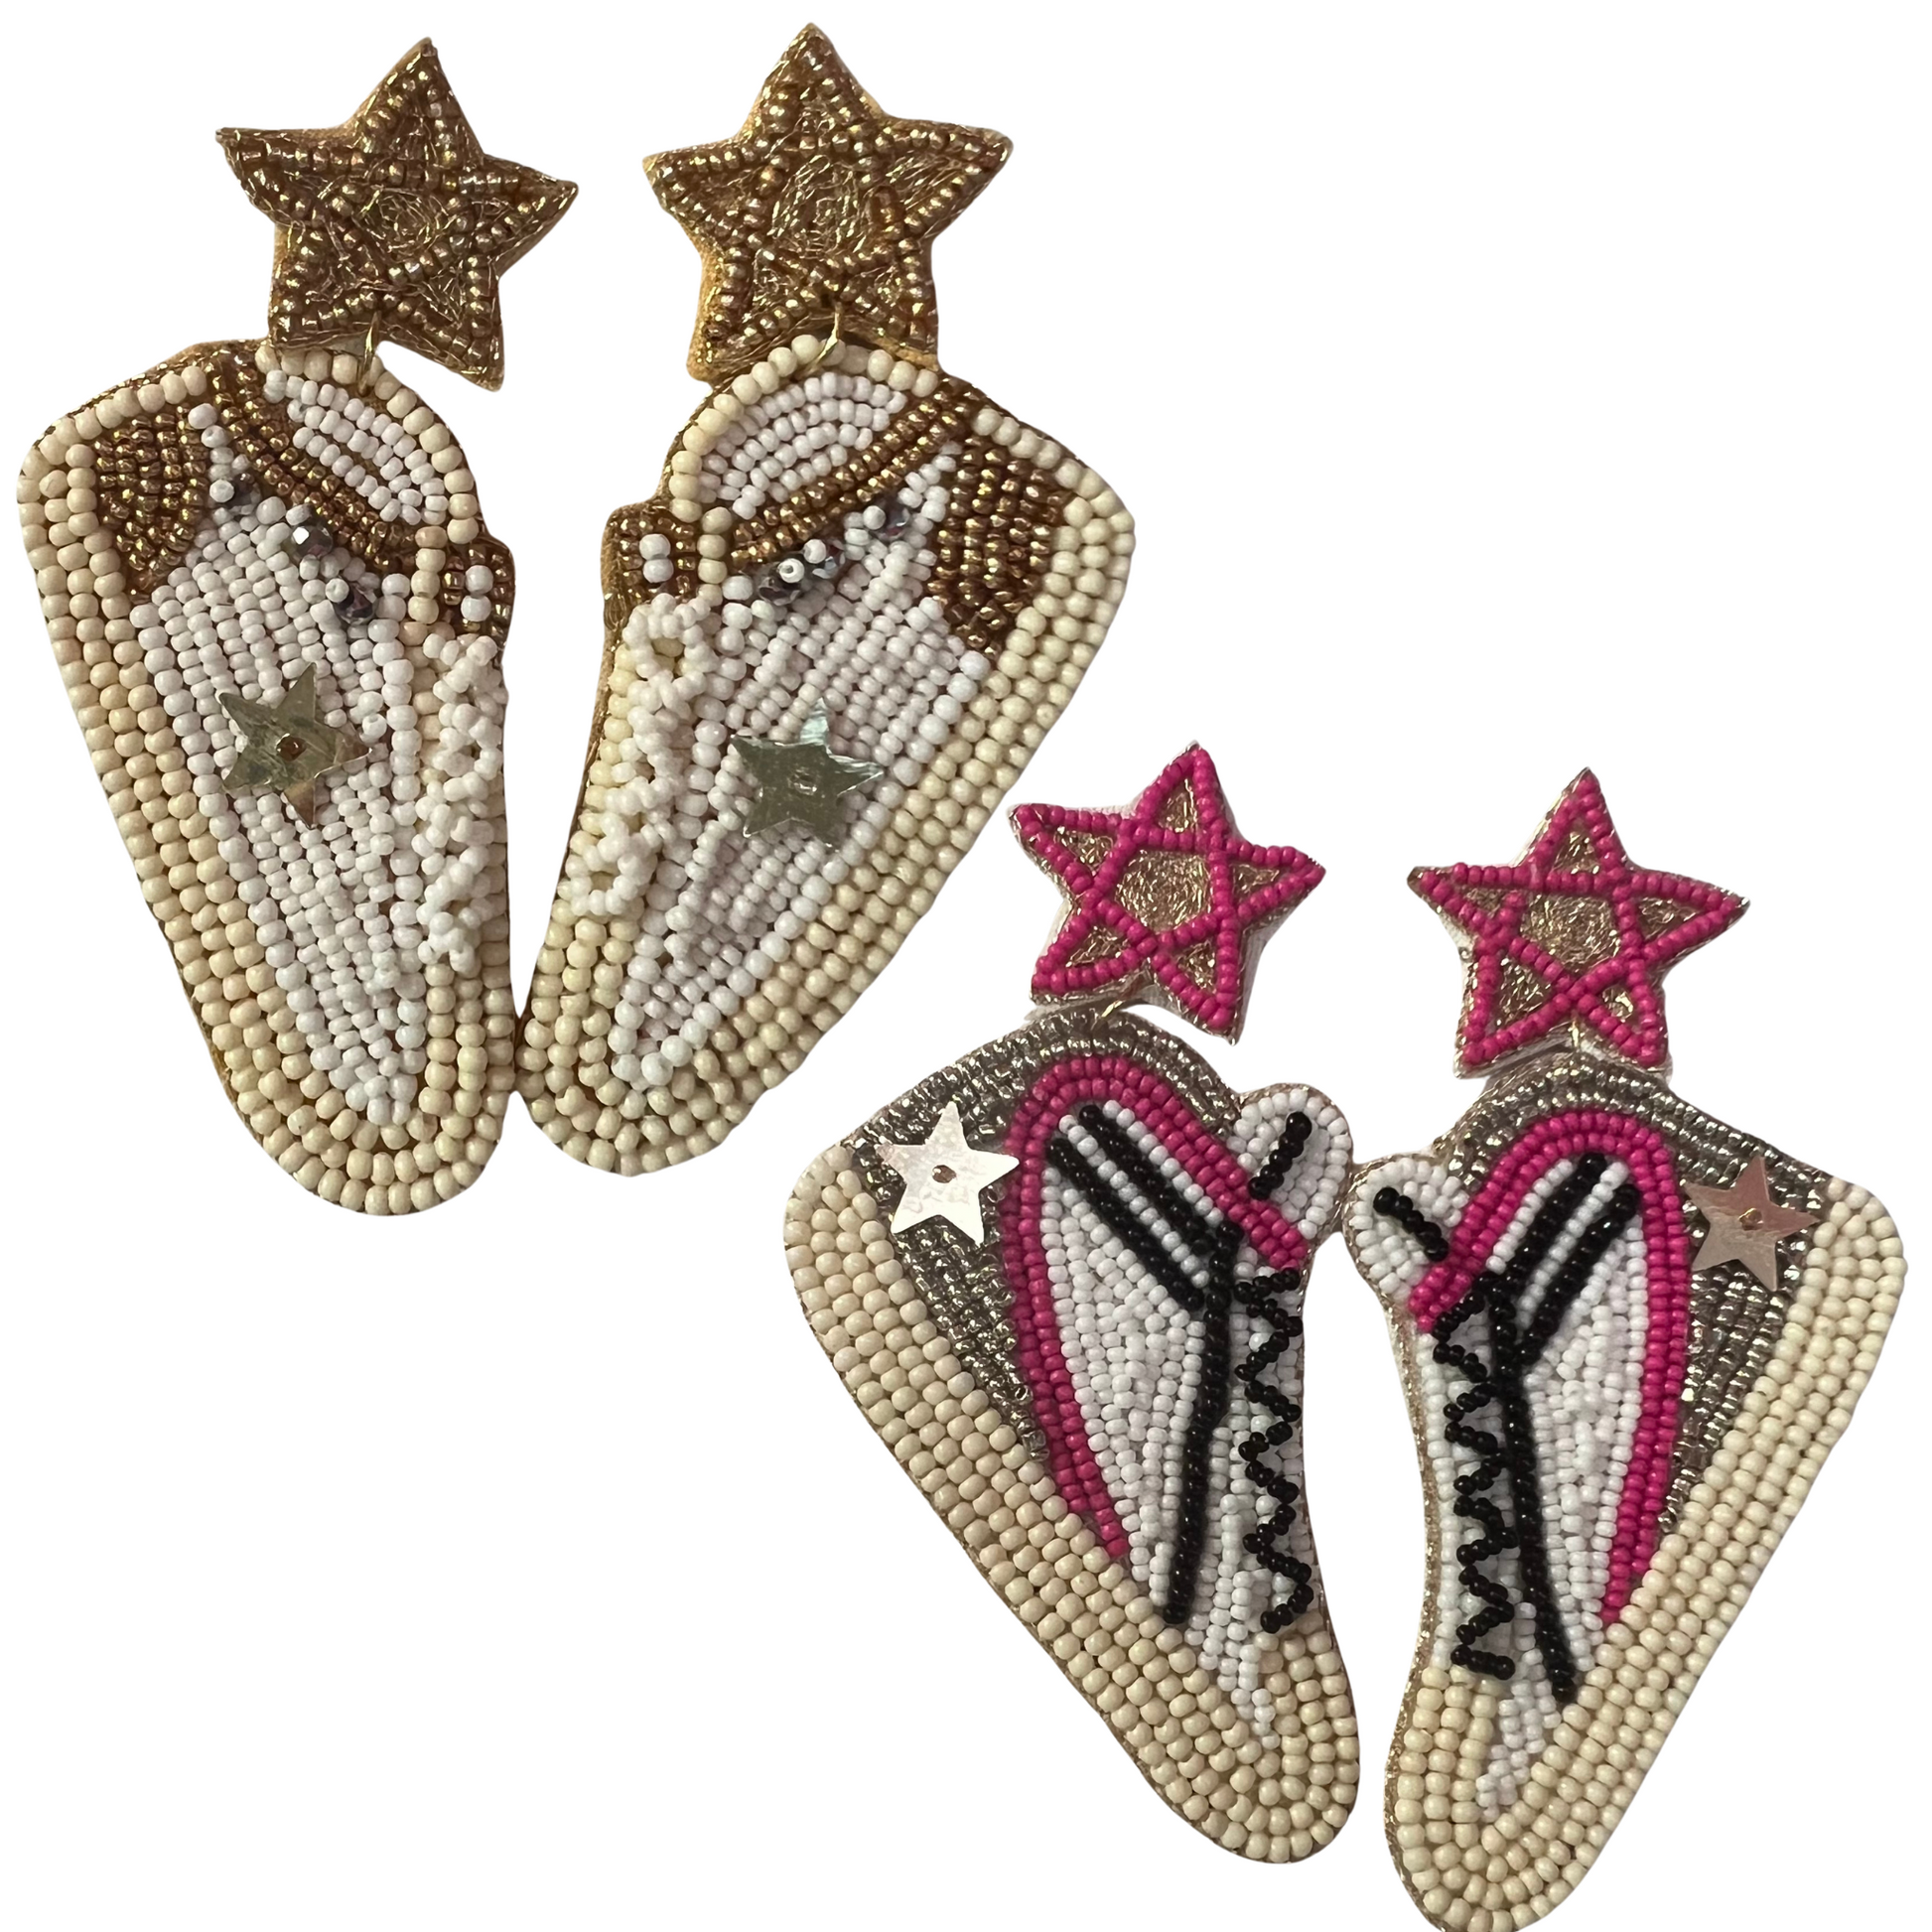 Adorn yourself with these exclusive Converse-inspired earrings. In classic black and pink or gold and white, they feature beaded shoes that will inject a fashionable edge to any ensemble. Show your unique style with these trendy earrings.